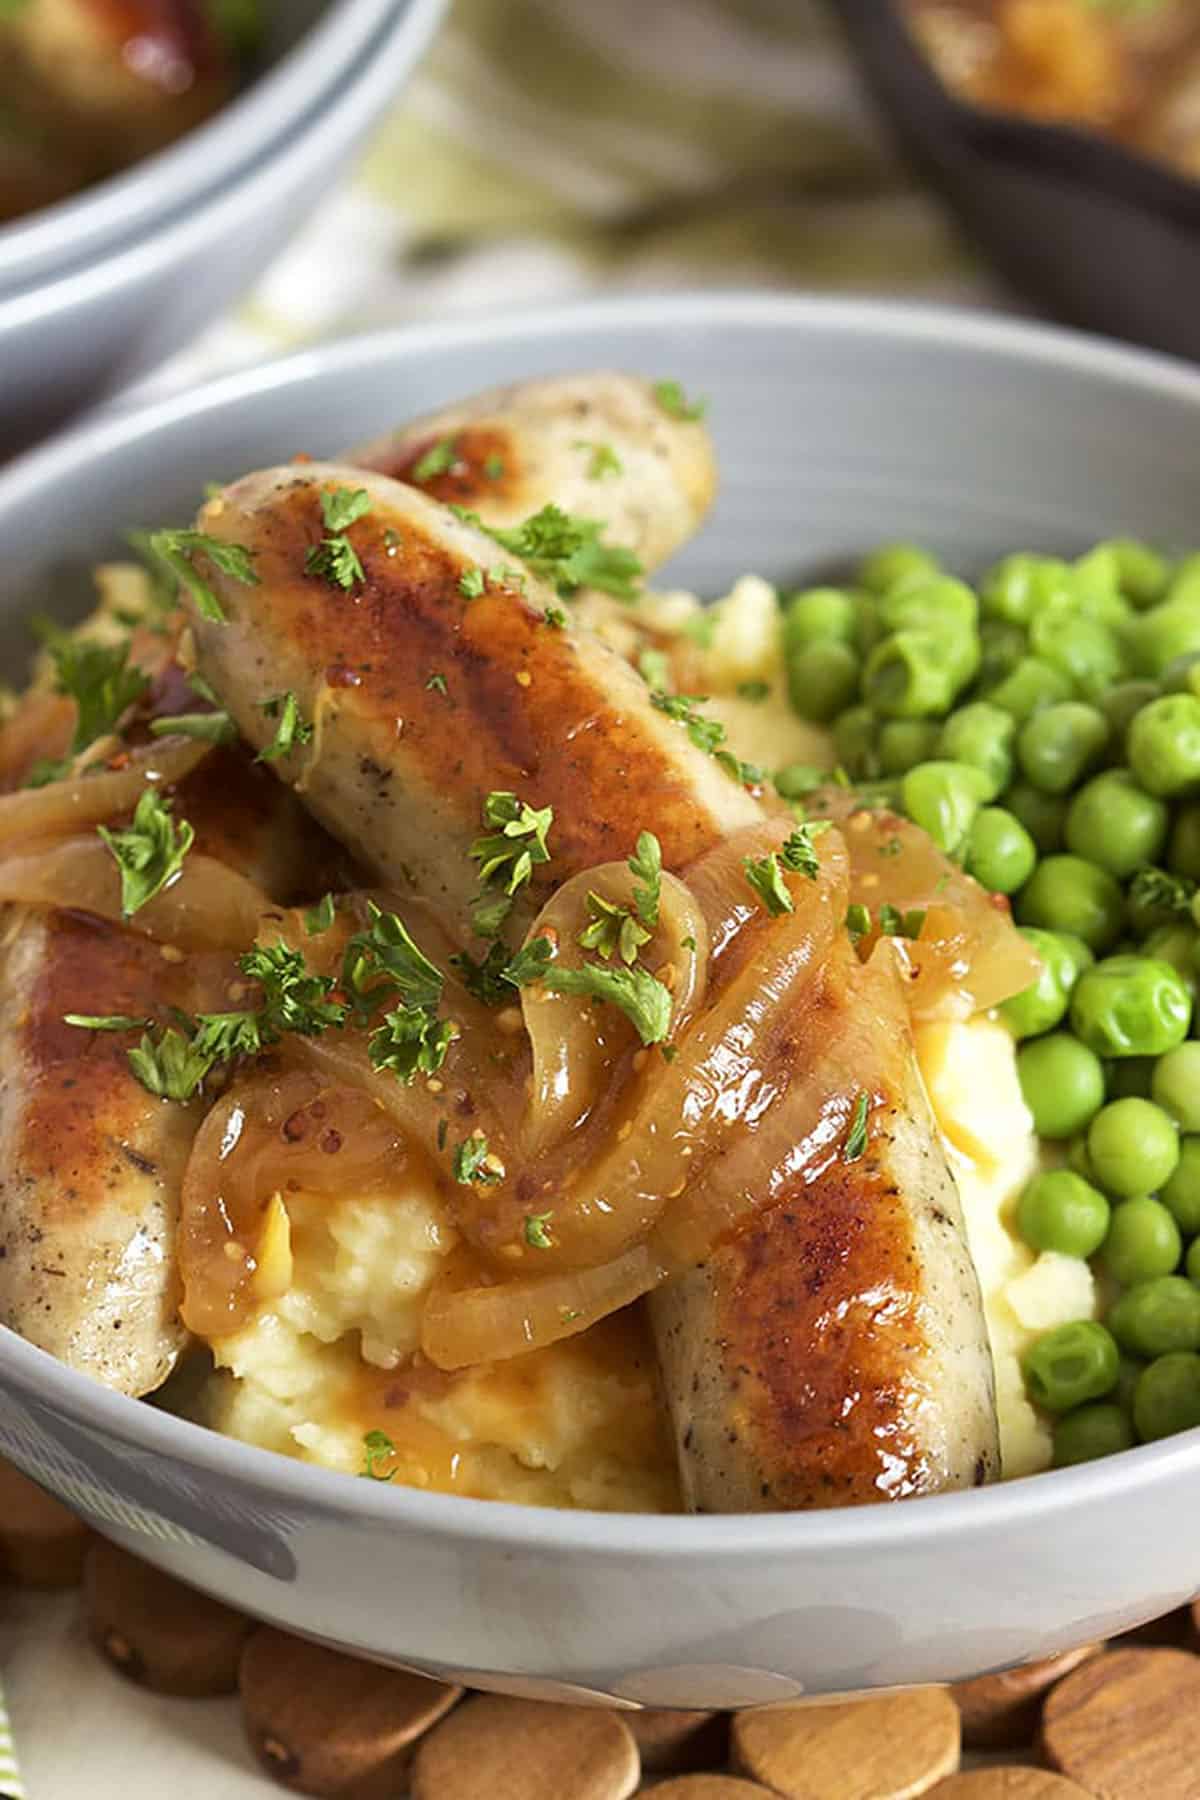 Two bangers on a pile of mashed potatoes with green peas. Onion gravy on top of the sausages.